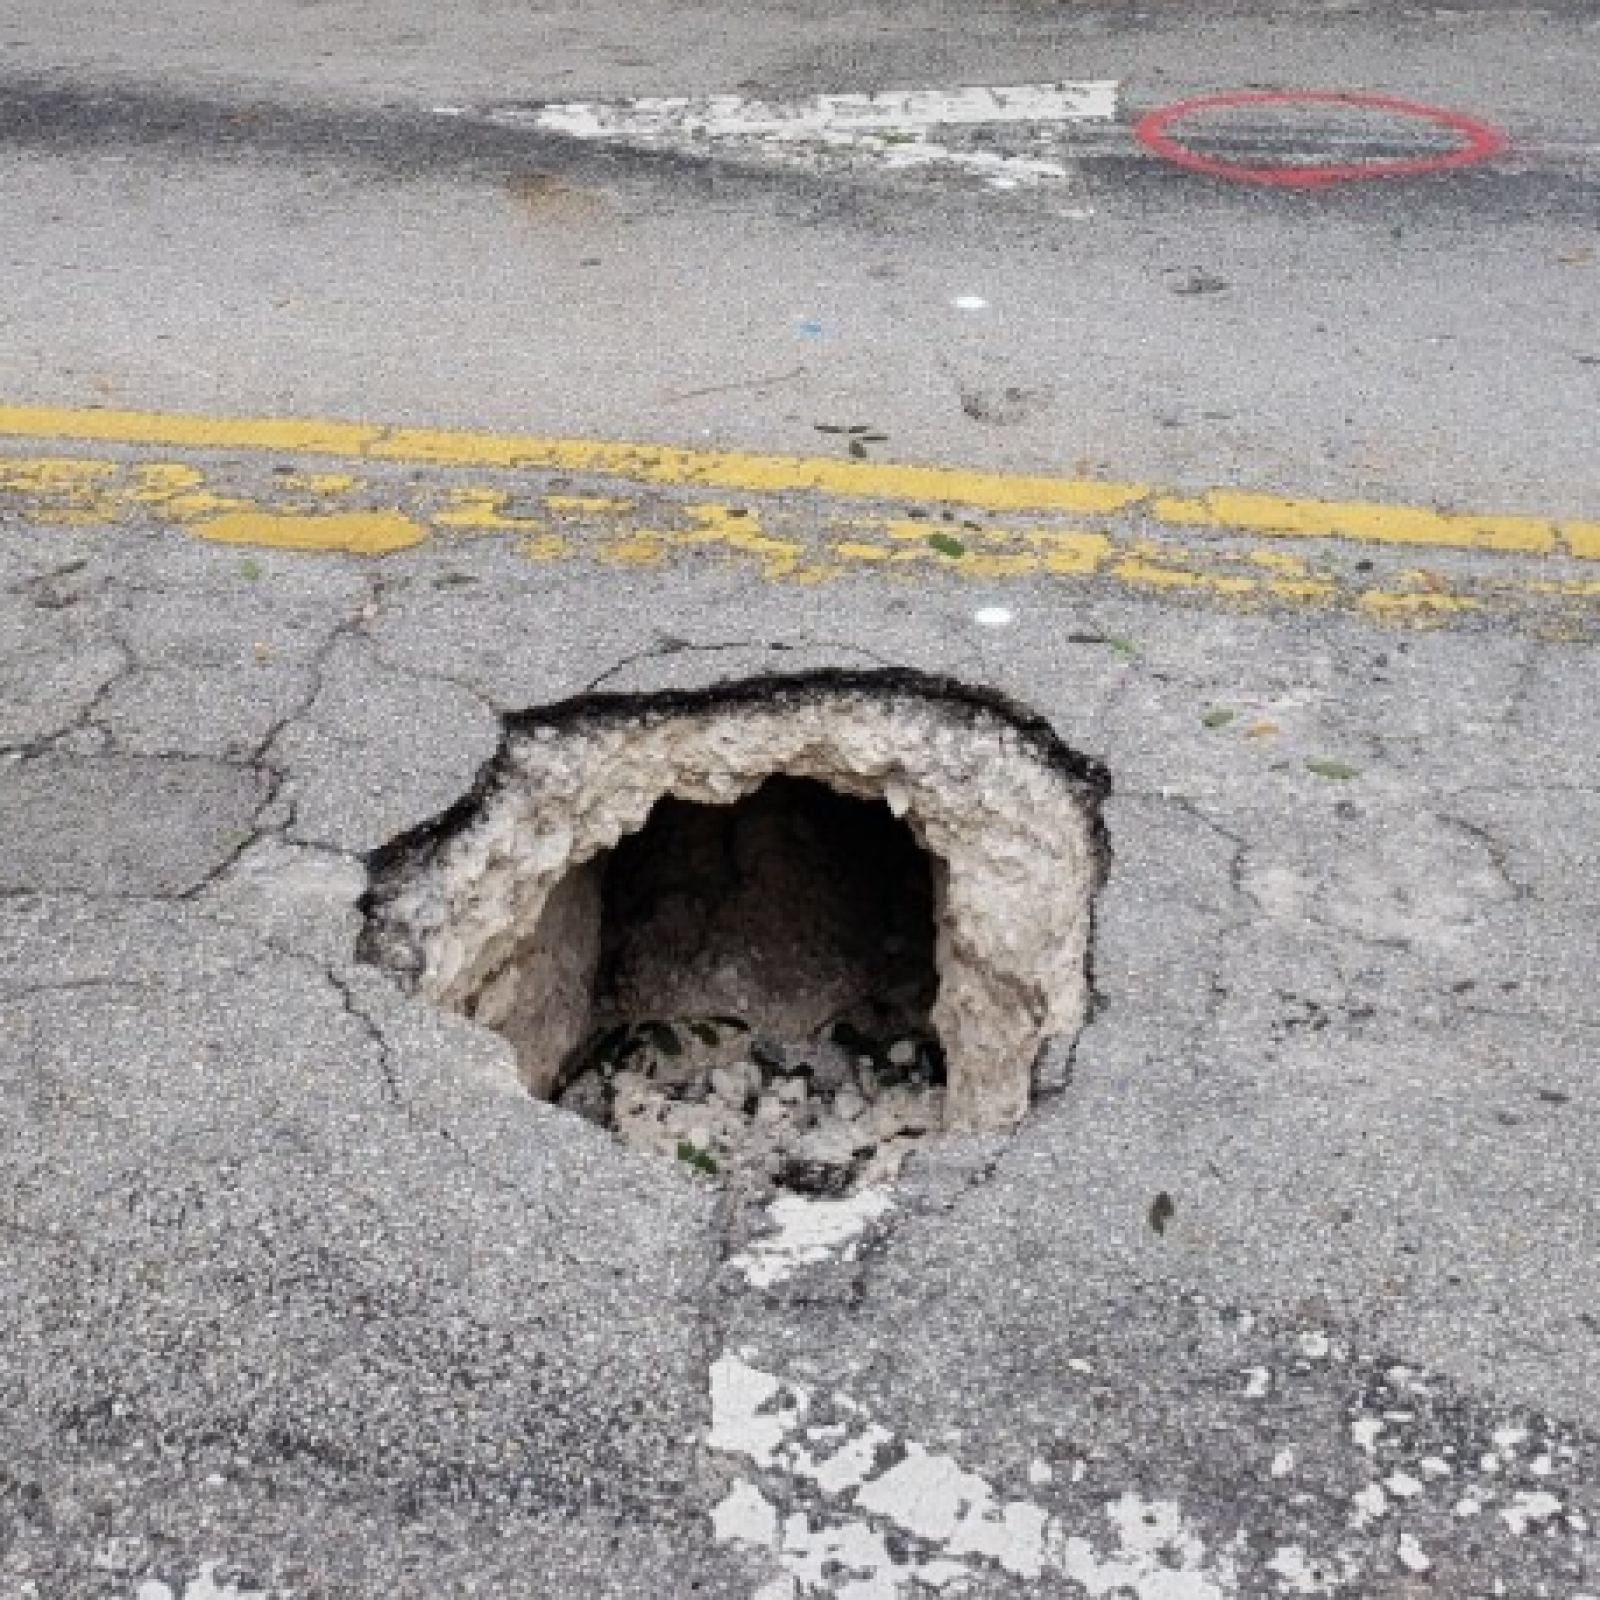 Sinkhole That Opened Up In Florida Was Actually Tunnel